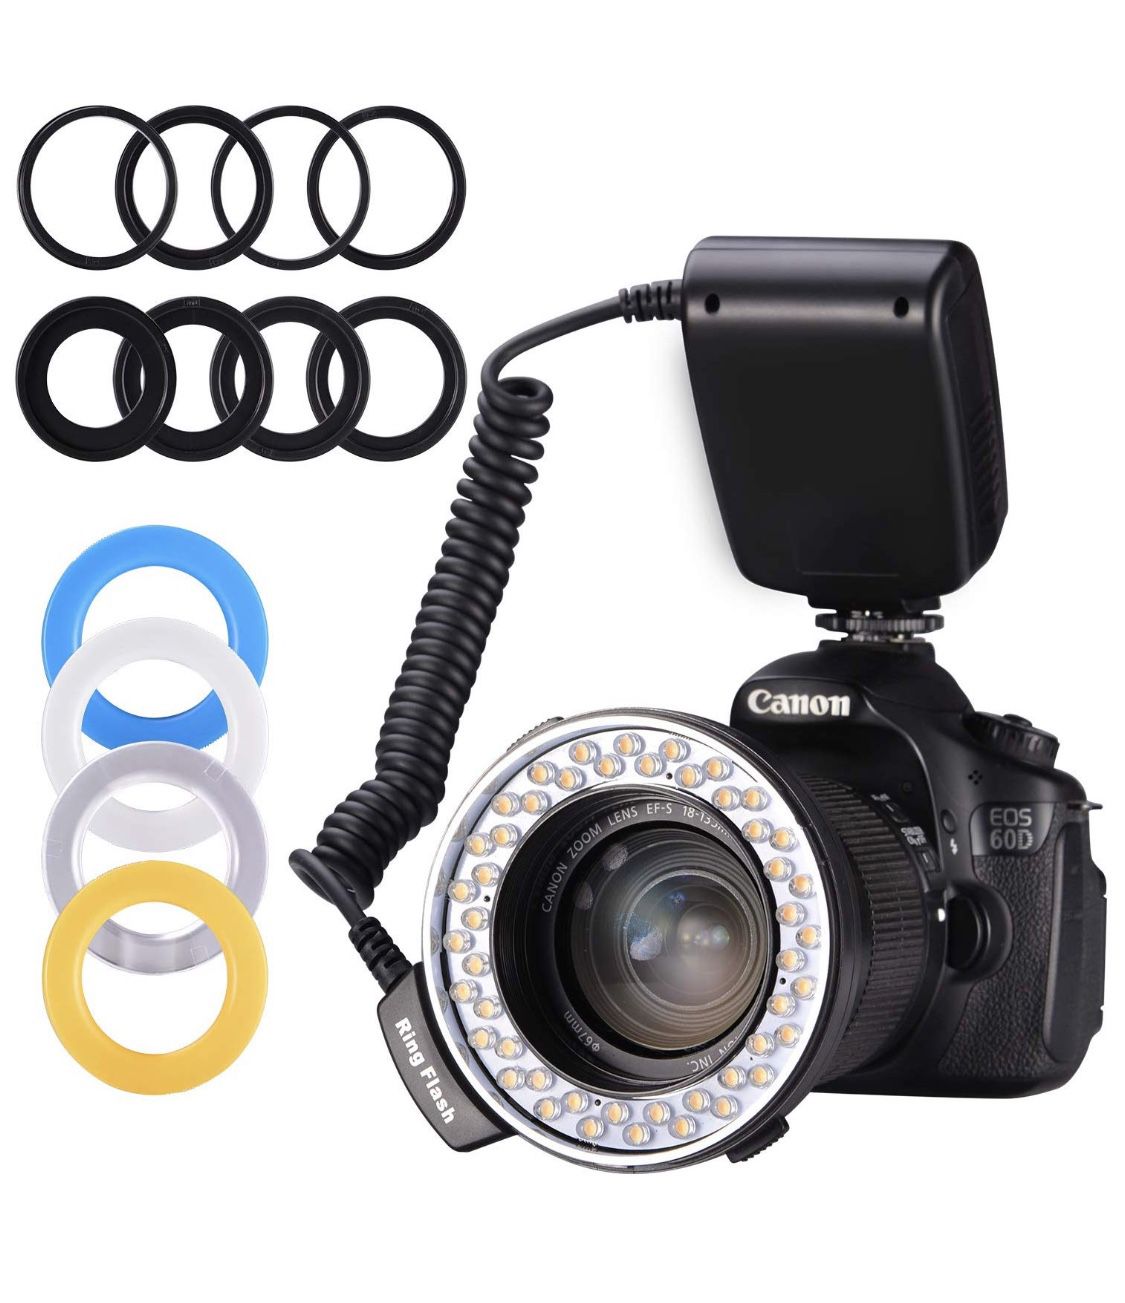 Ring Flash,Emiral 48 Macro LED Ring Flash Bundle with LCD Display Power Control, Adapter Rings and Flash Diffusers for Camera and Other DSLR Cameras